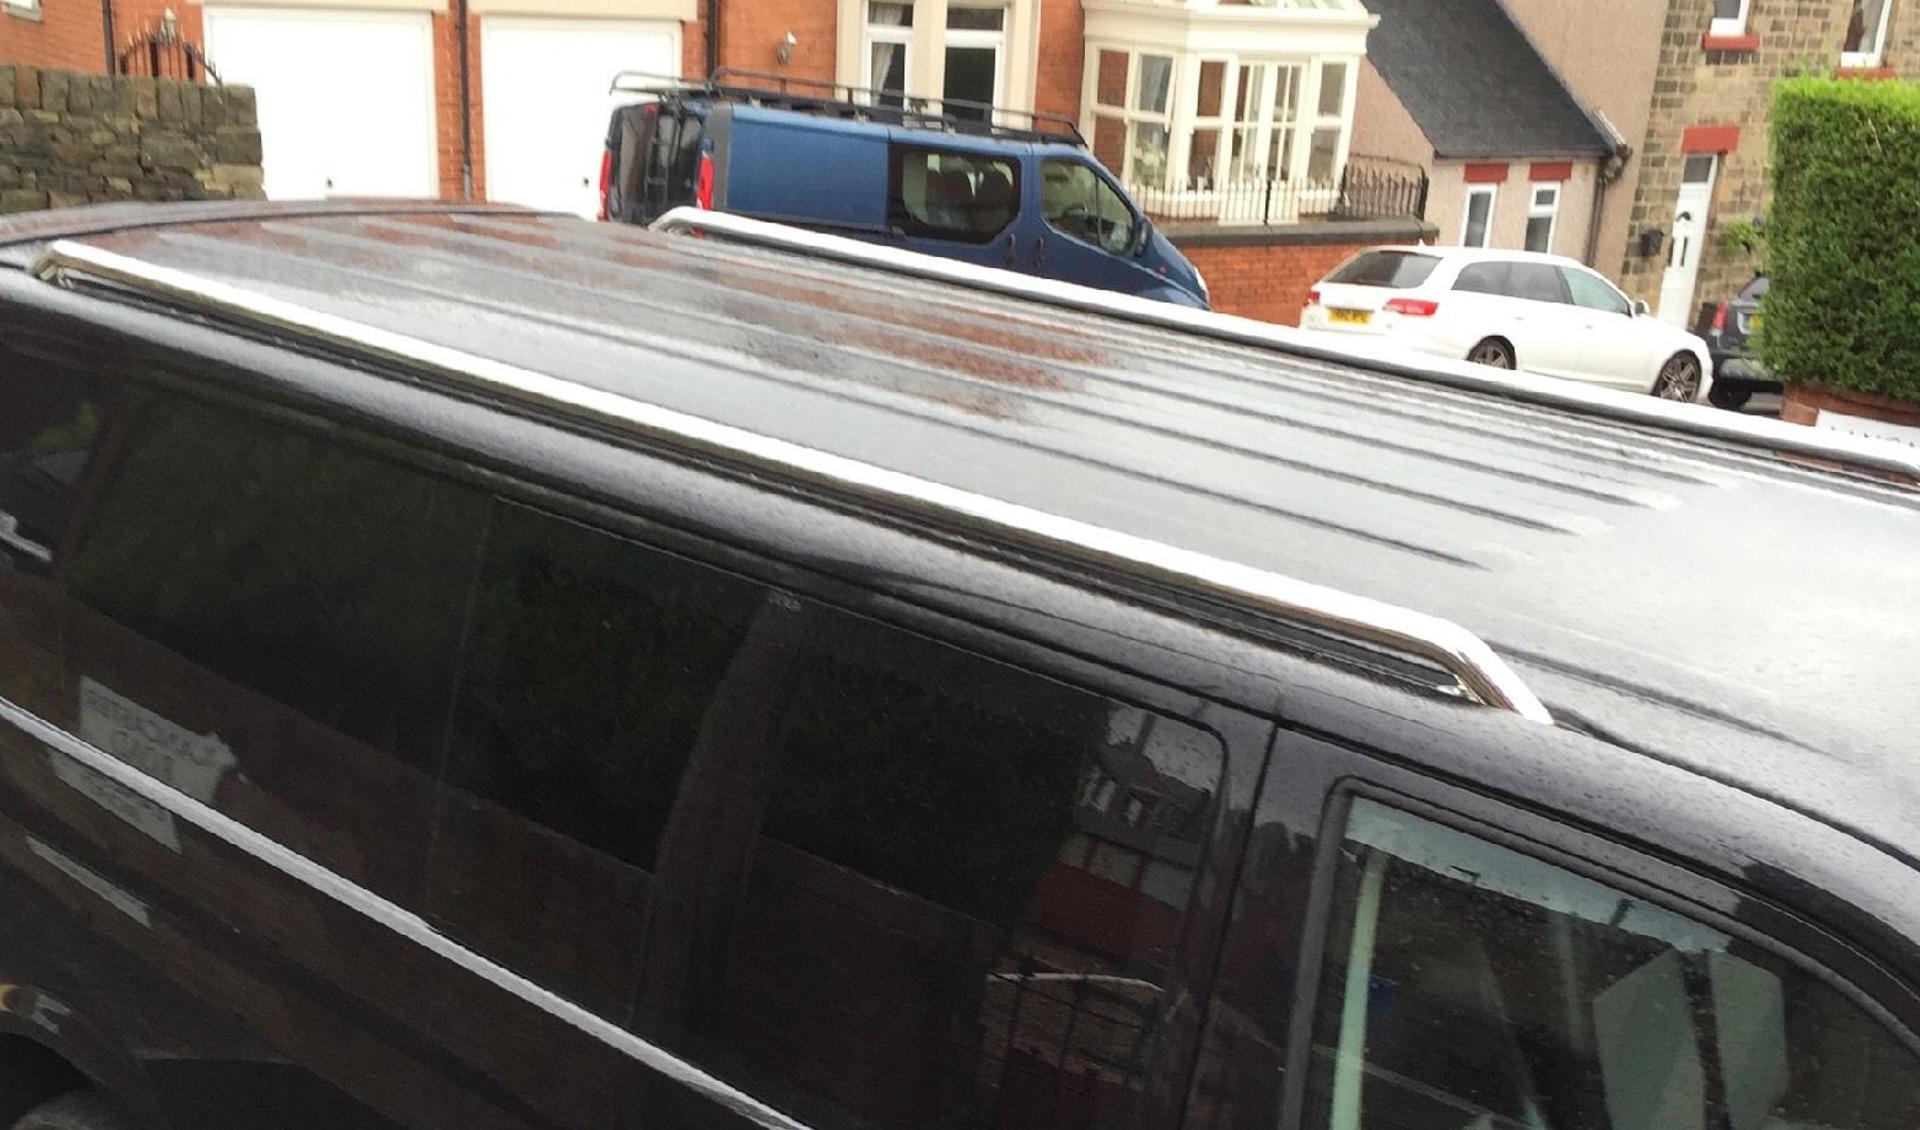 Stainless Steel OE Style Roof Rails for the Volkswagen Transporter T5 SWB -  - sold by Direct4x4